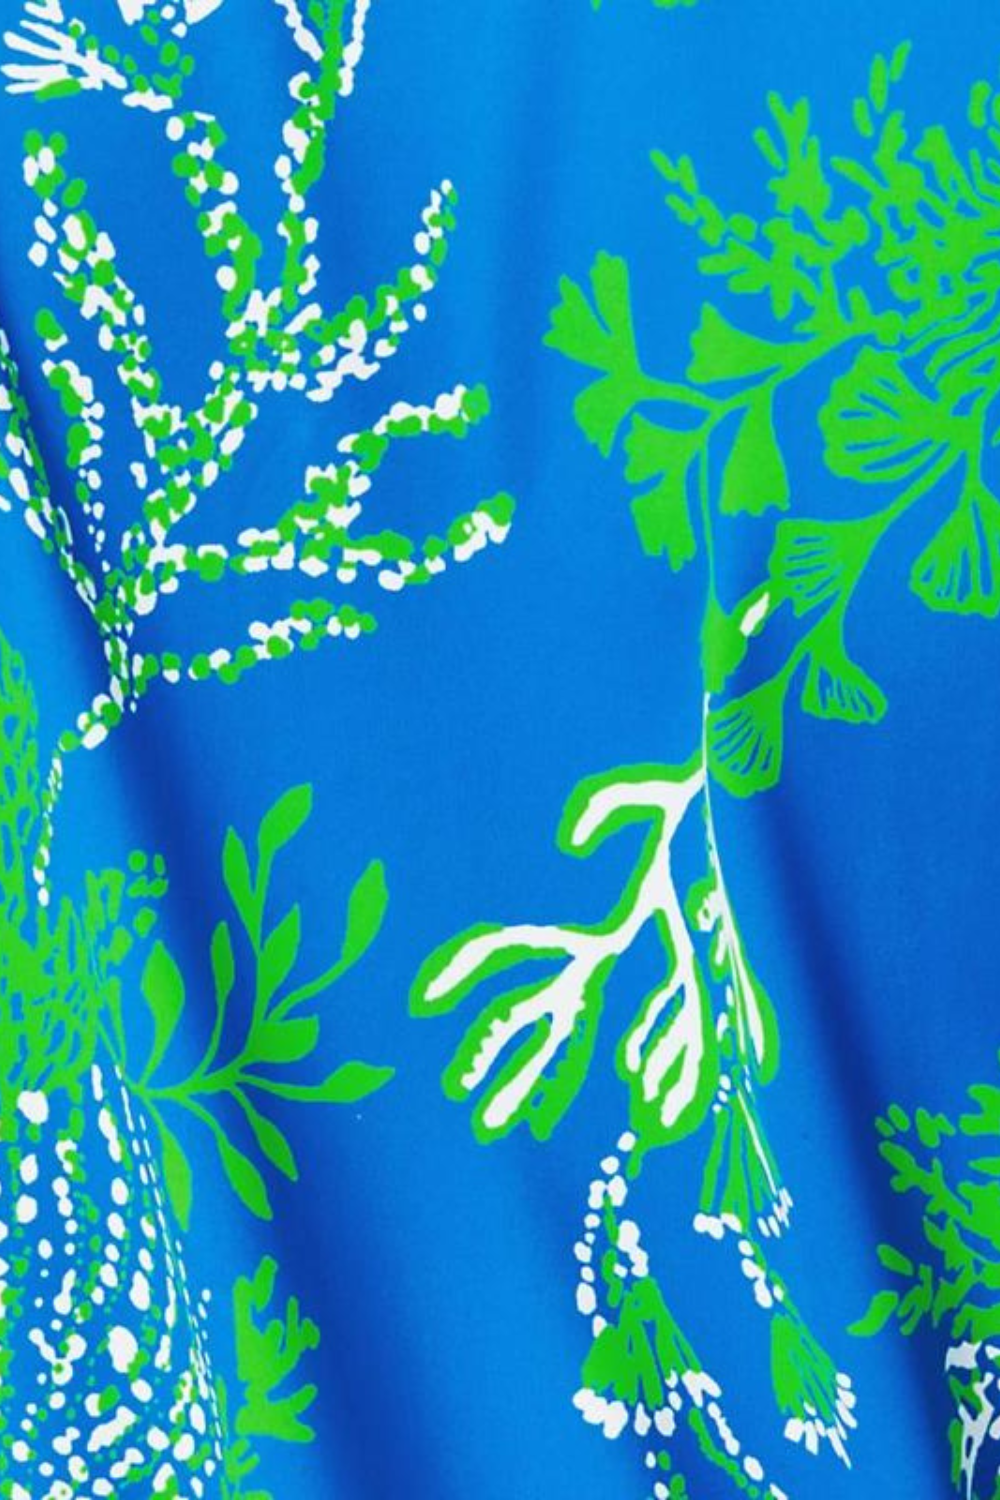 Lilly Pulitzer Talli V-Neck Cover Up - A Bit Salty